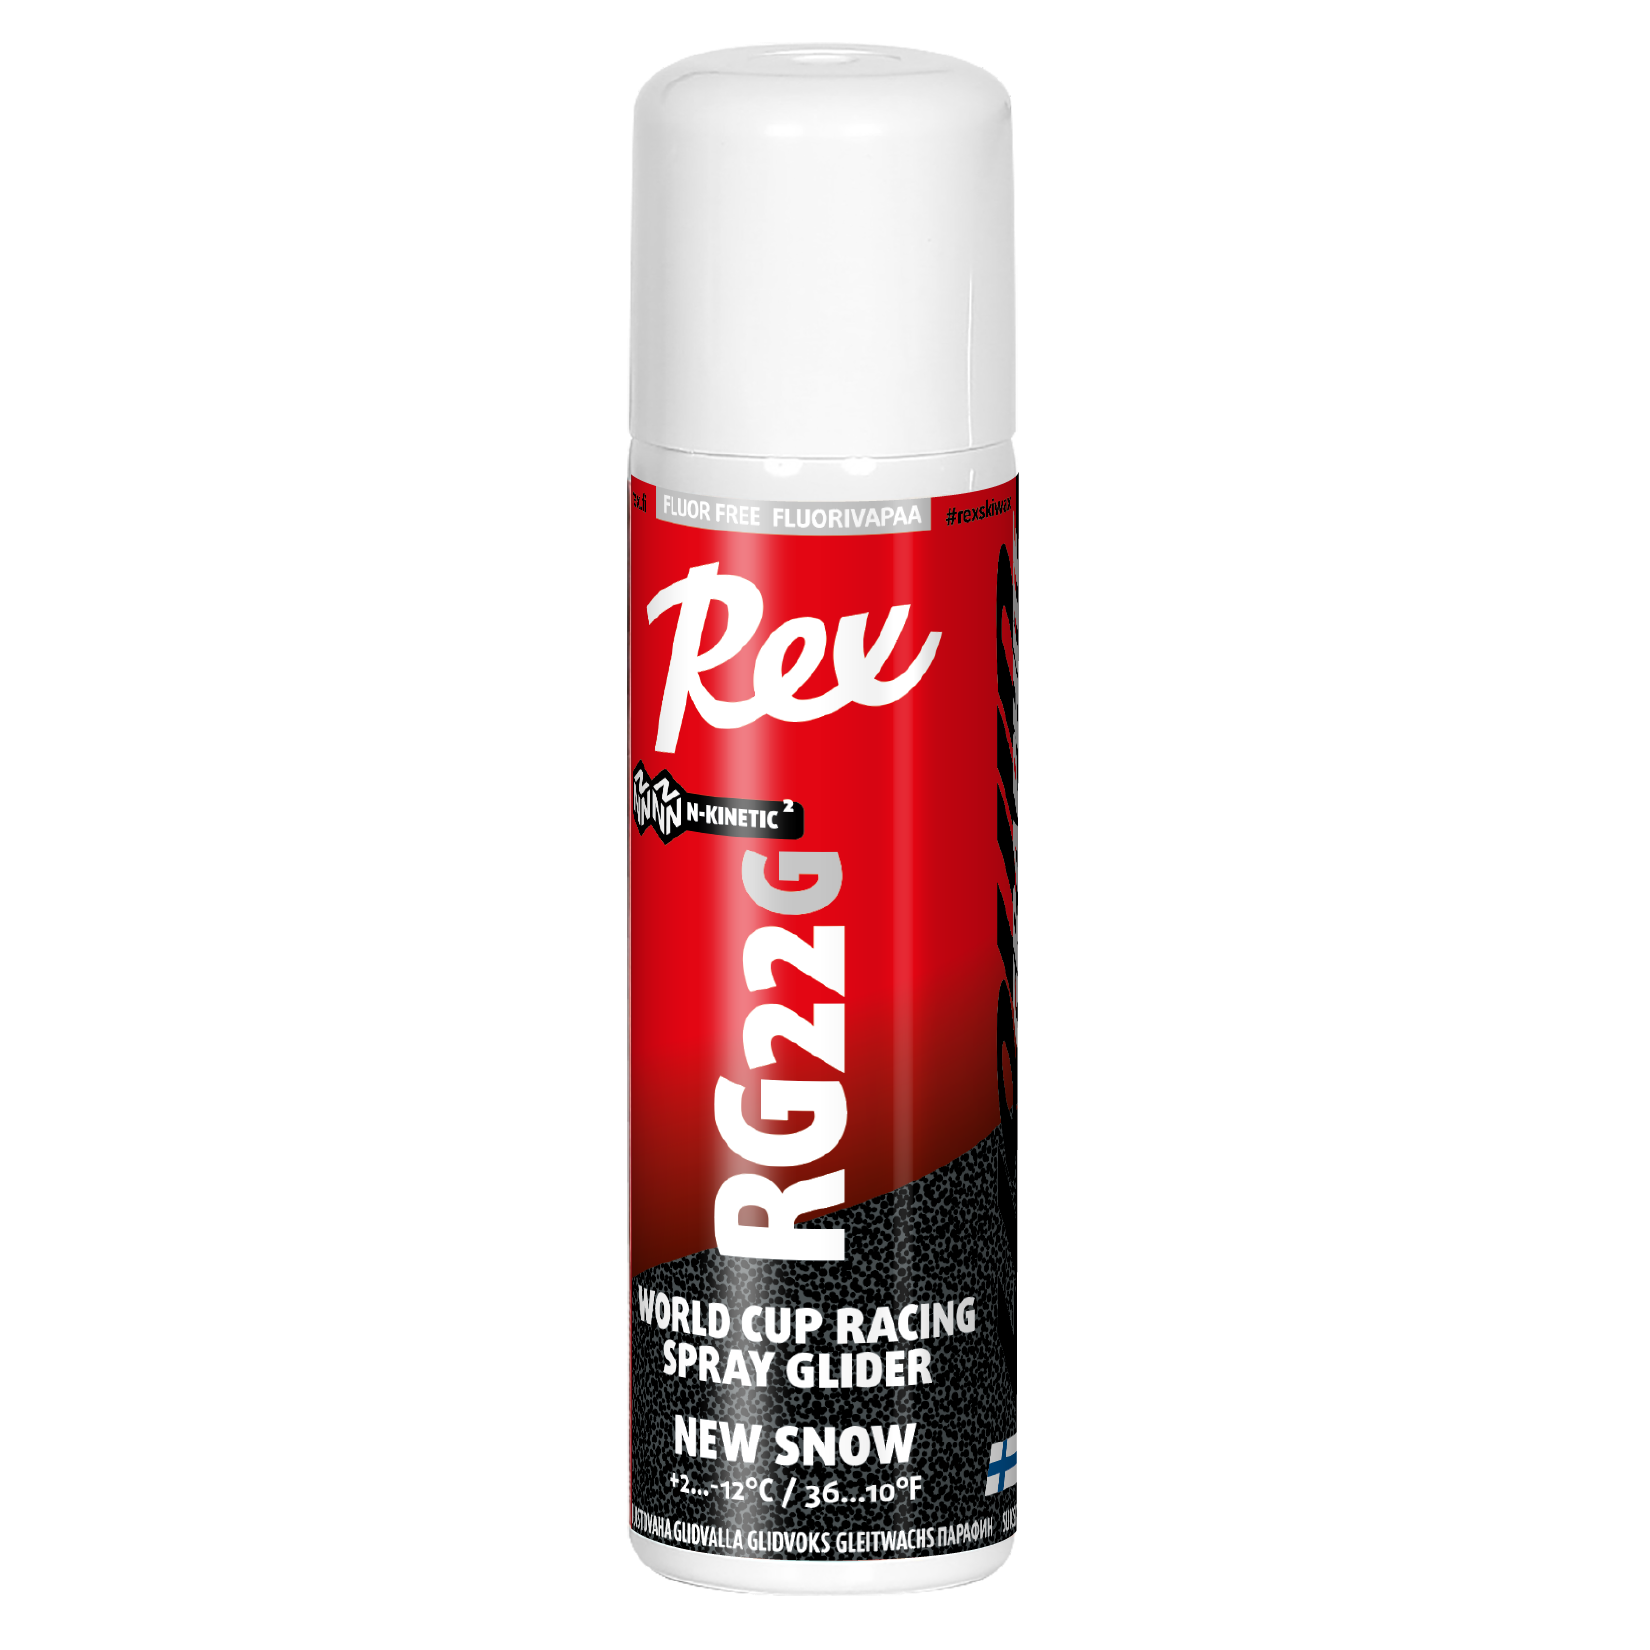 A product picture of the Rex Wax RG22G Graphite `New Snow` N-Kinetic Non-Fluor Liquid Spray Glider